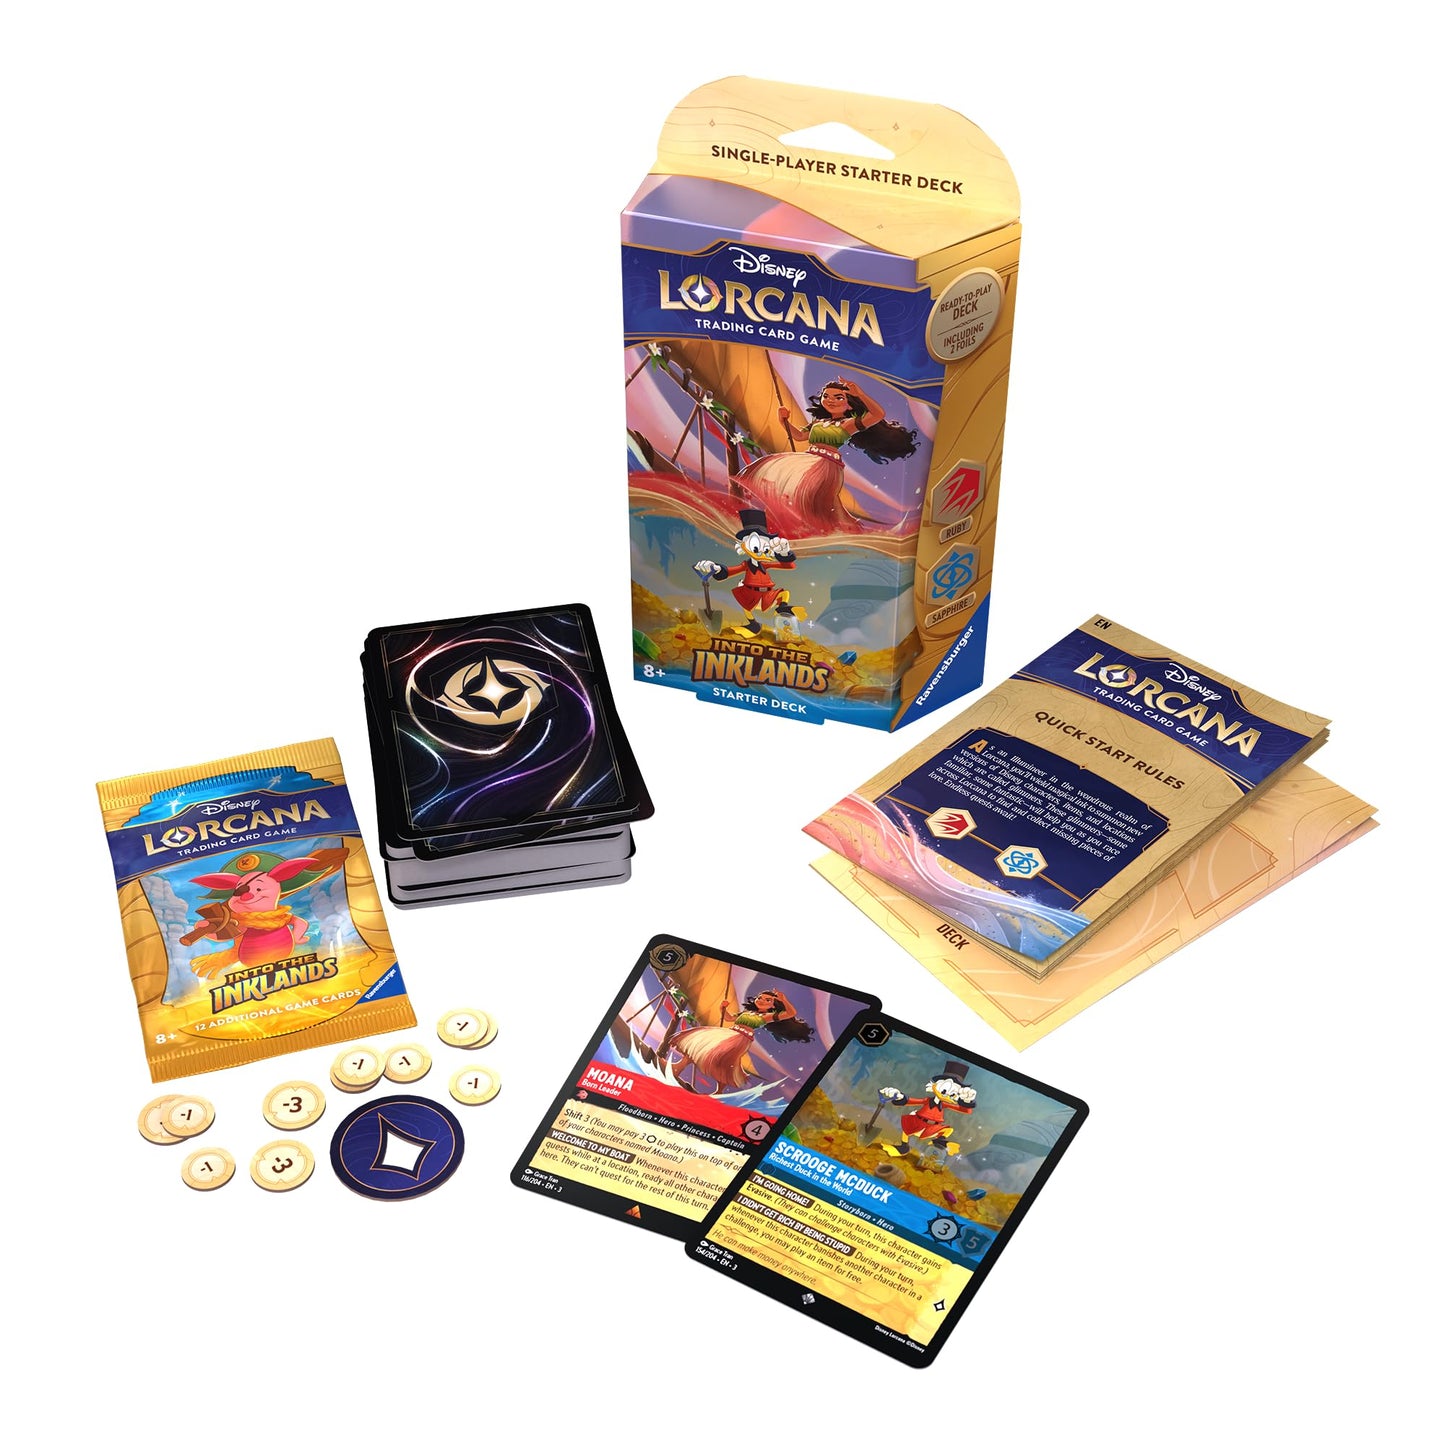 Ravensburger Disney Lorcana: Into the Inklands TCG Starter Deck: Ruby & Sapphire for Ages 8 and Up
…